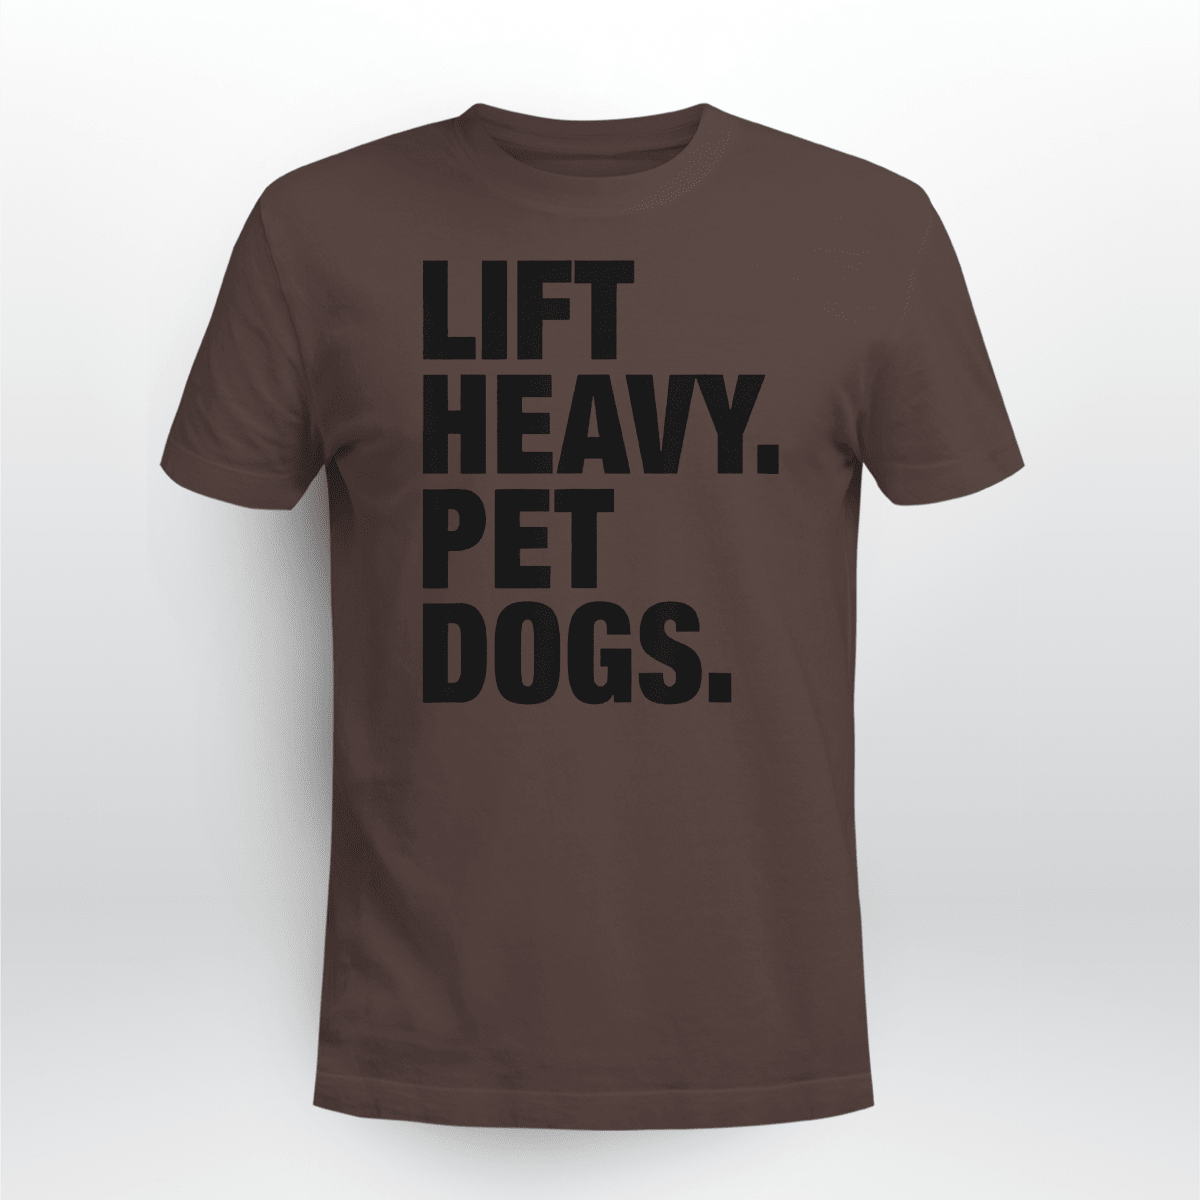 This discount is for you  :  Lift Heavy. Pet Dogs.